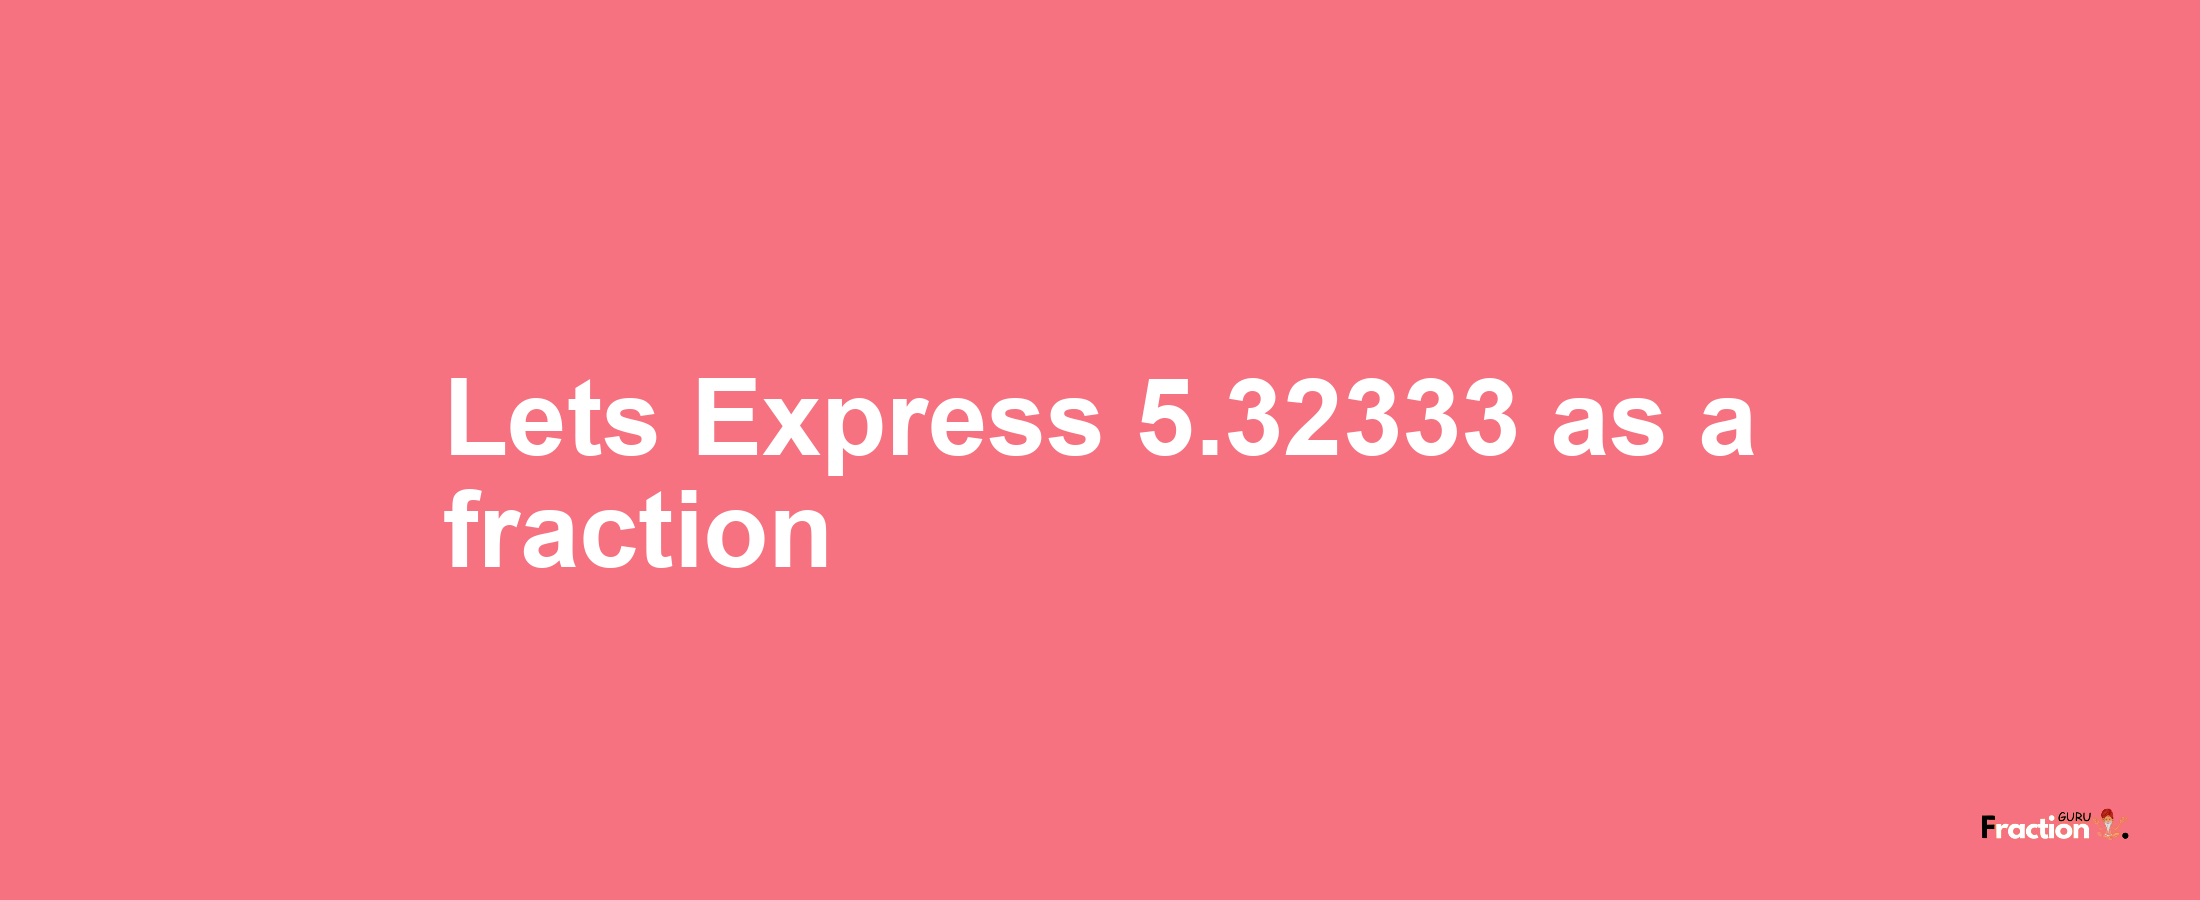 Lets Express 5.32333 as afraction